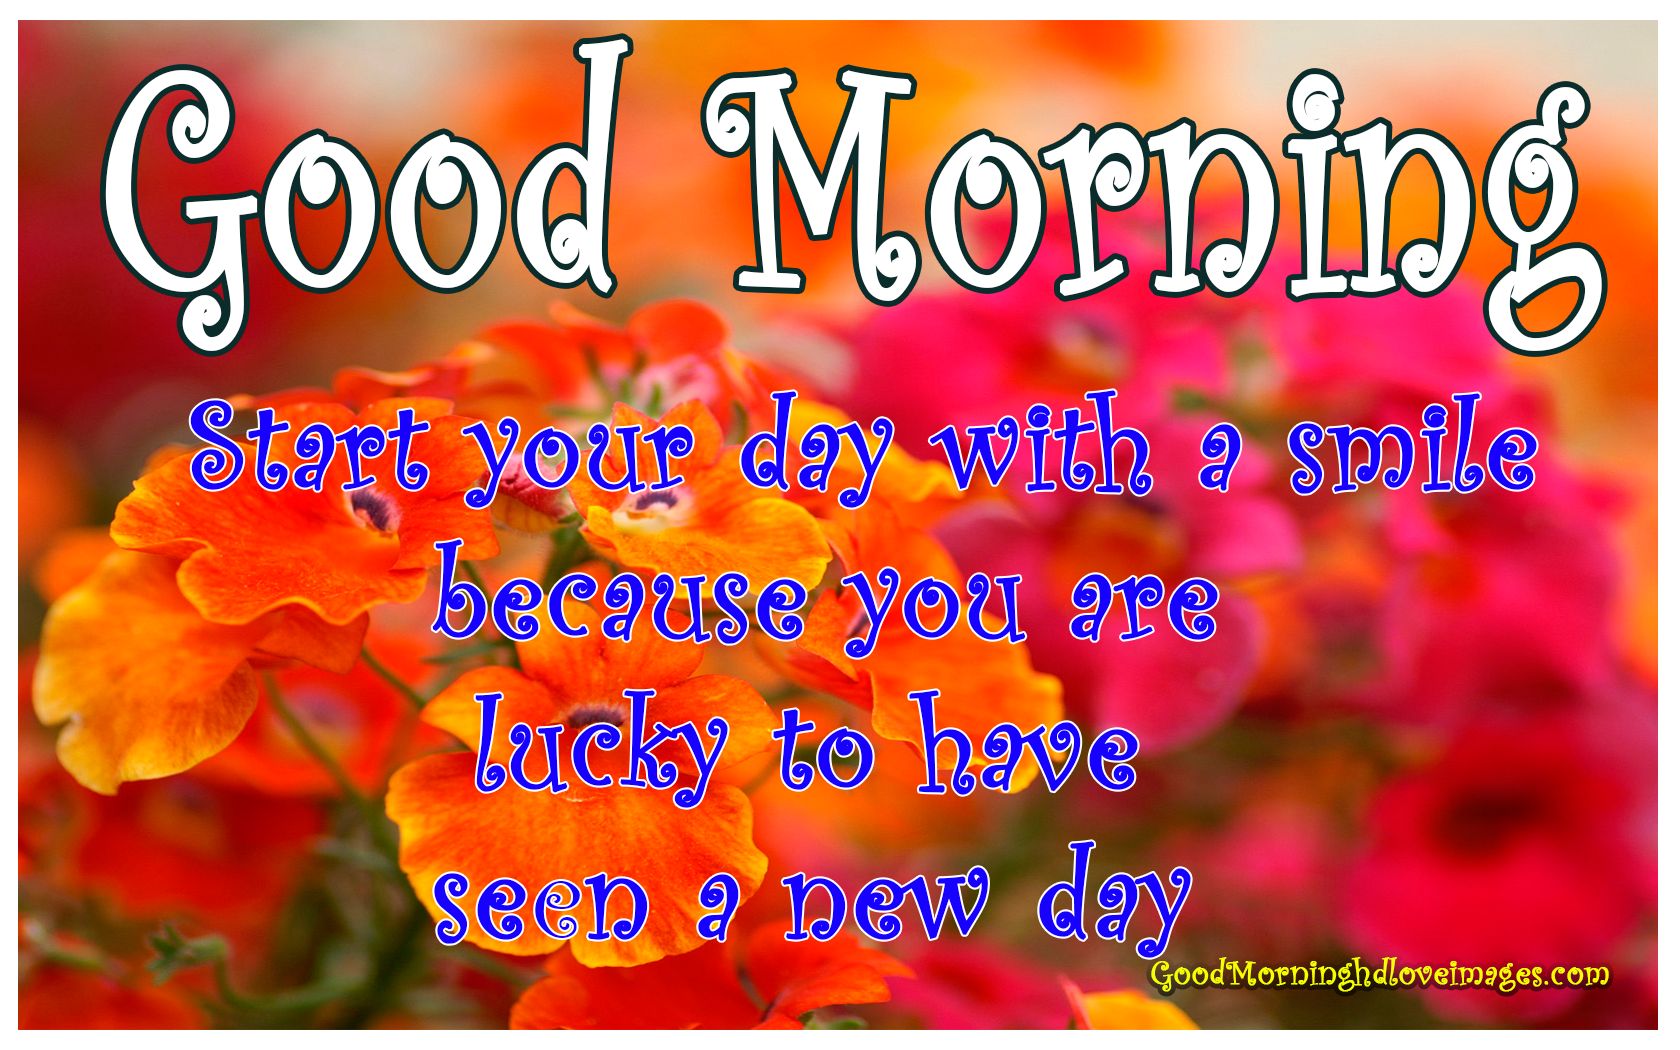 Lovely Good Morning Images HD 1080p Download - Good Morning